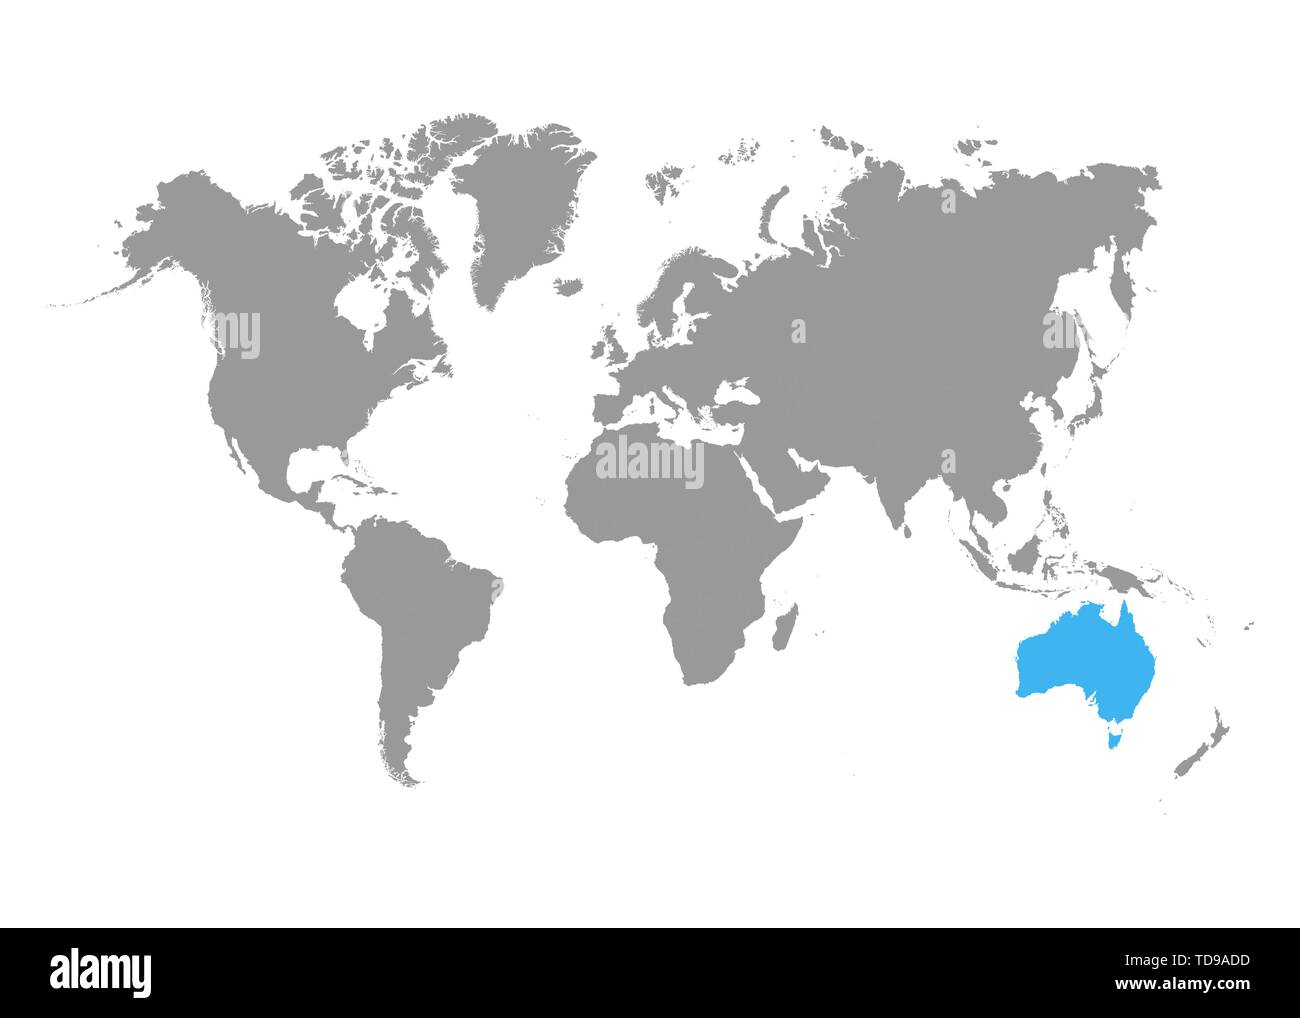 The Map Of Australia Is Highlighted In Blue On The World Map